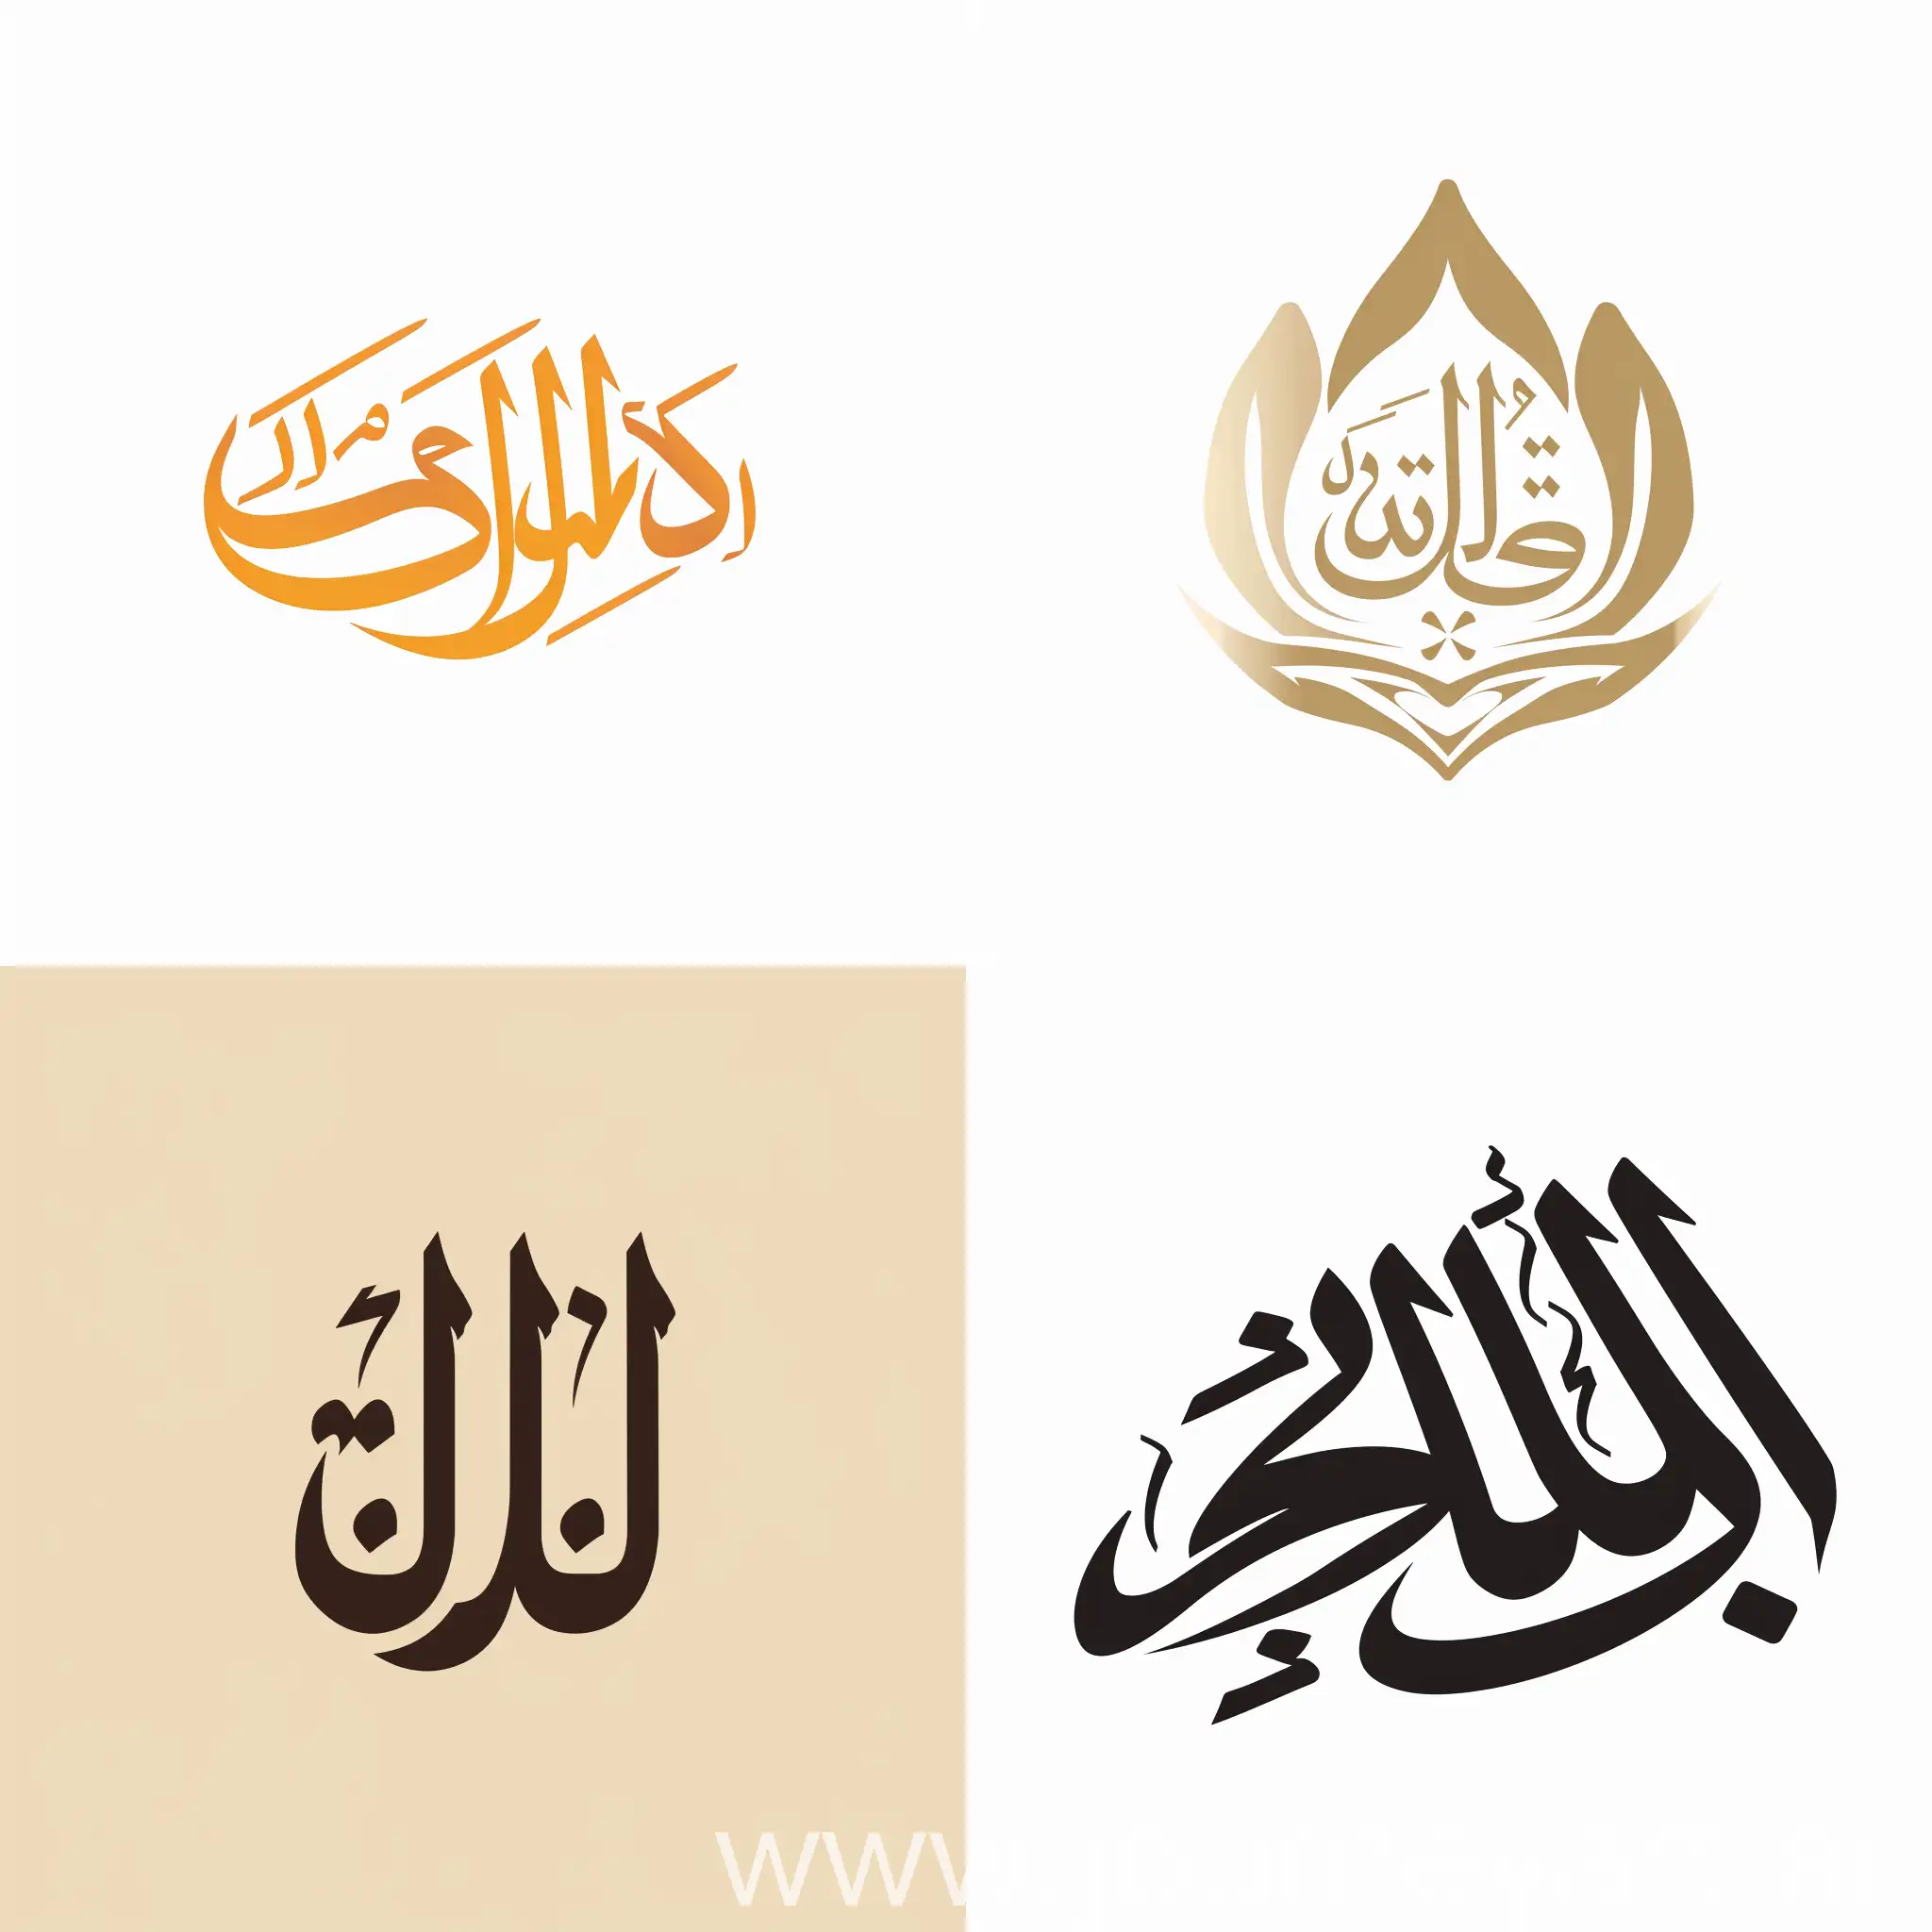 Modern-Arabic-Logo-Design-with-Abstract-Shapes-and-Geometric-Patterns